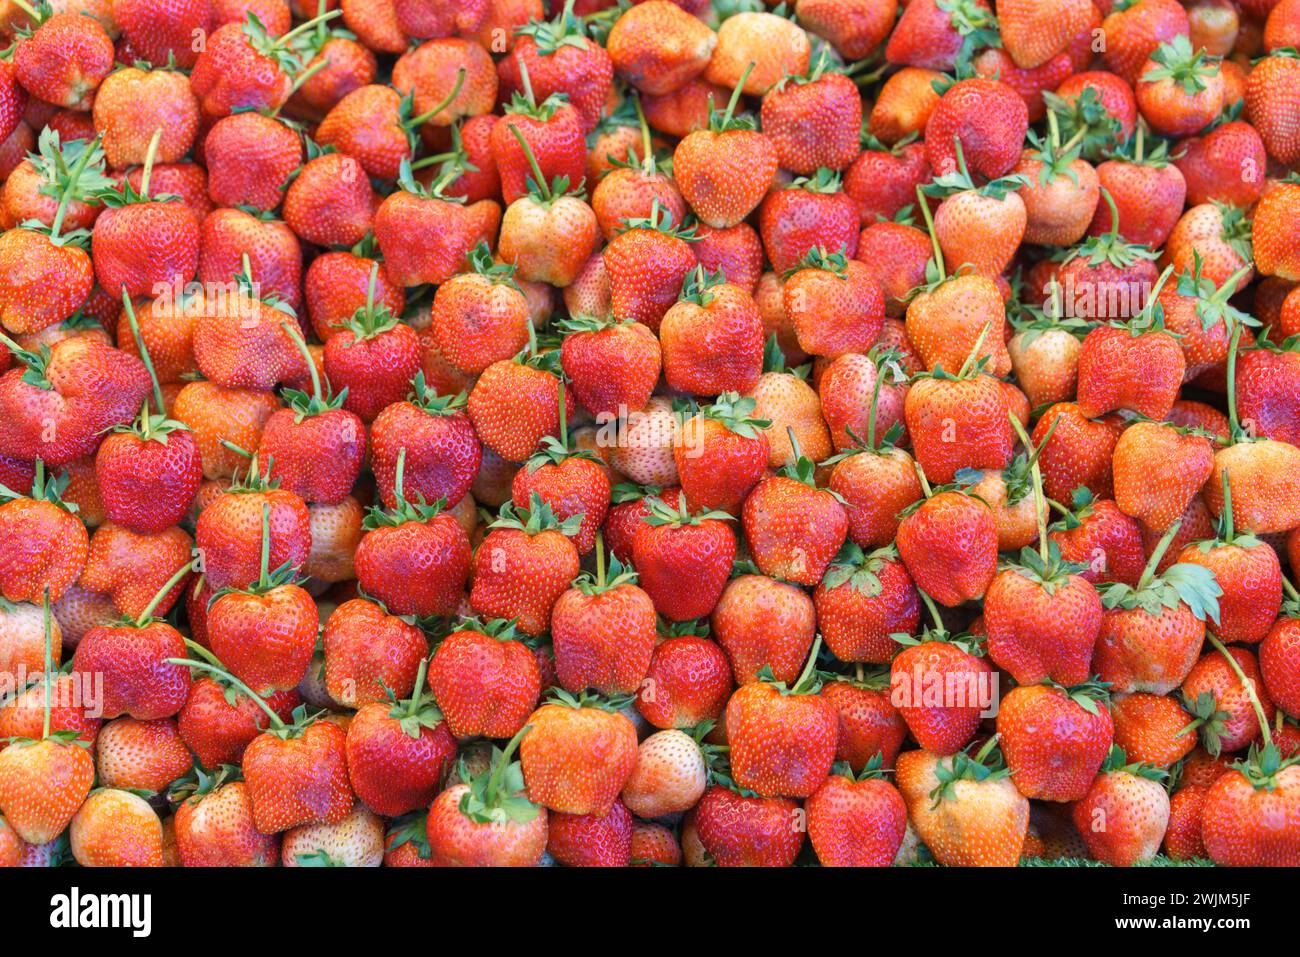 A close-up view of a large, vibrant pile of fresh strawberries, showcasing their bright red color and fresh green stems at a market Stock Photo